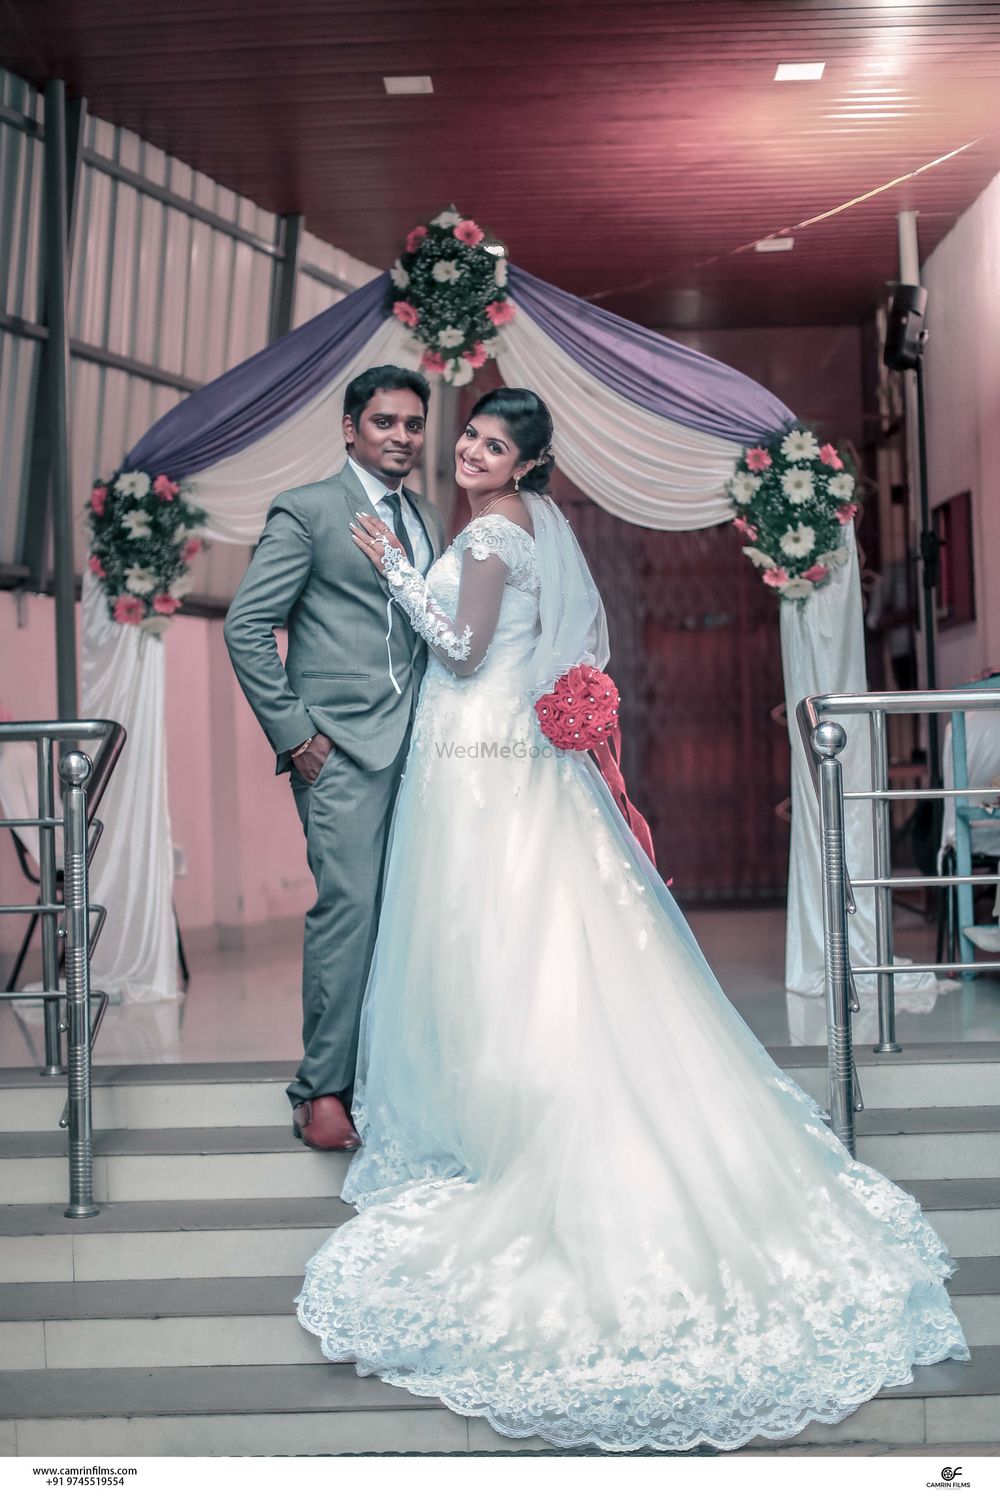 Photo From Vineeth & Nivitha - By Camrin Films